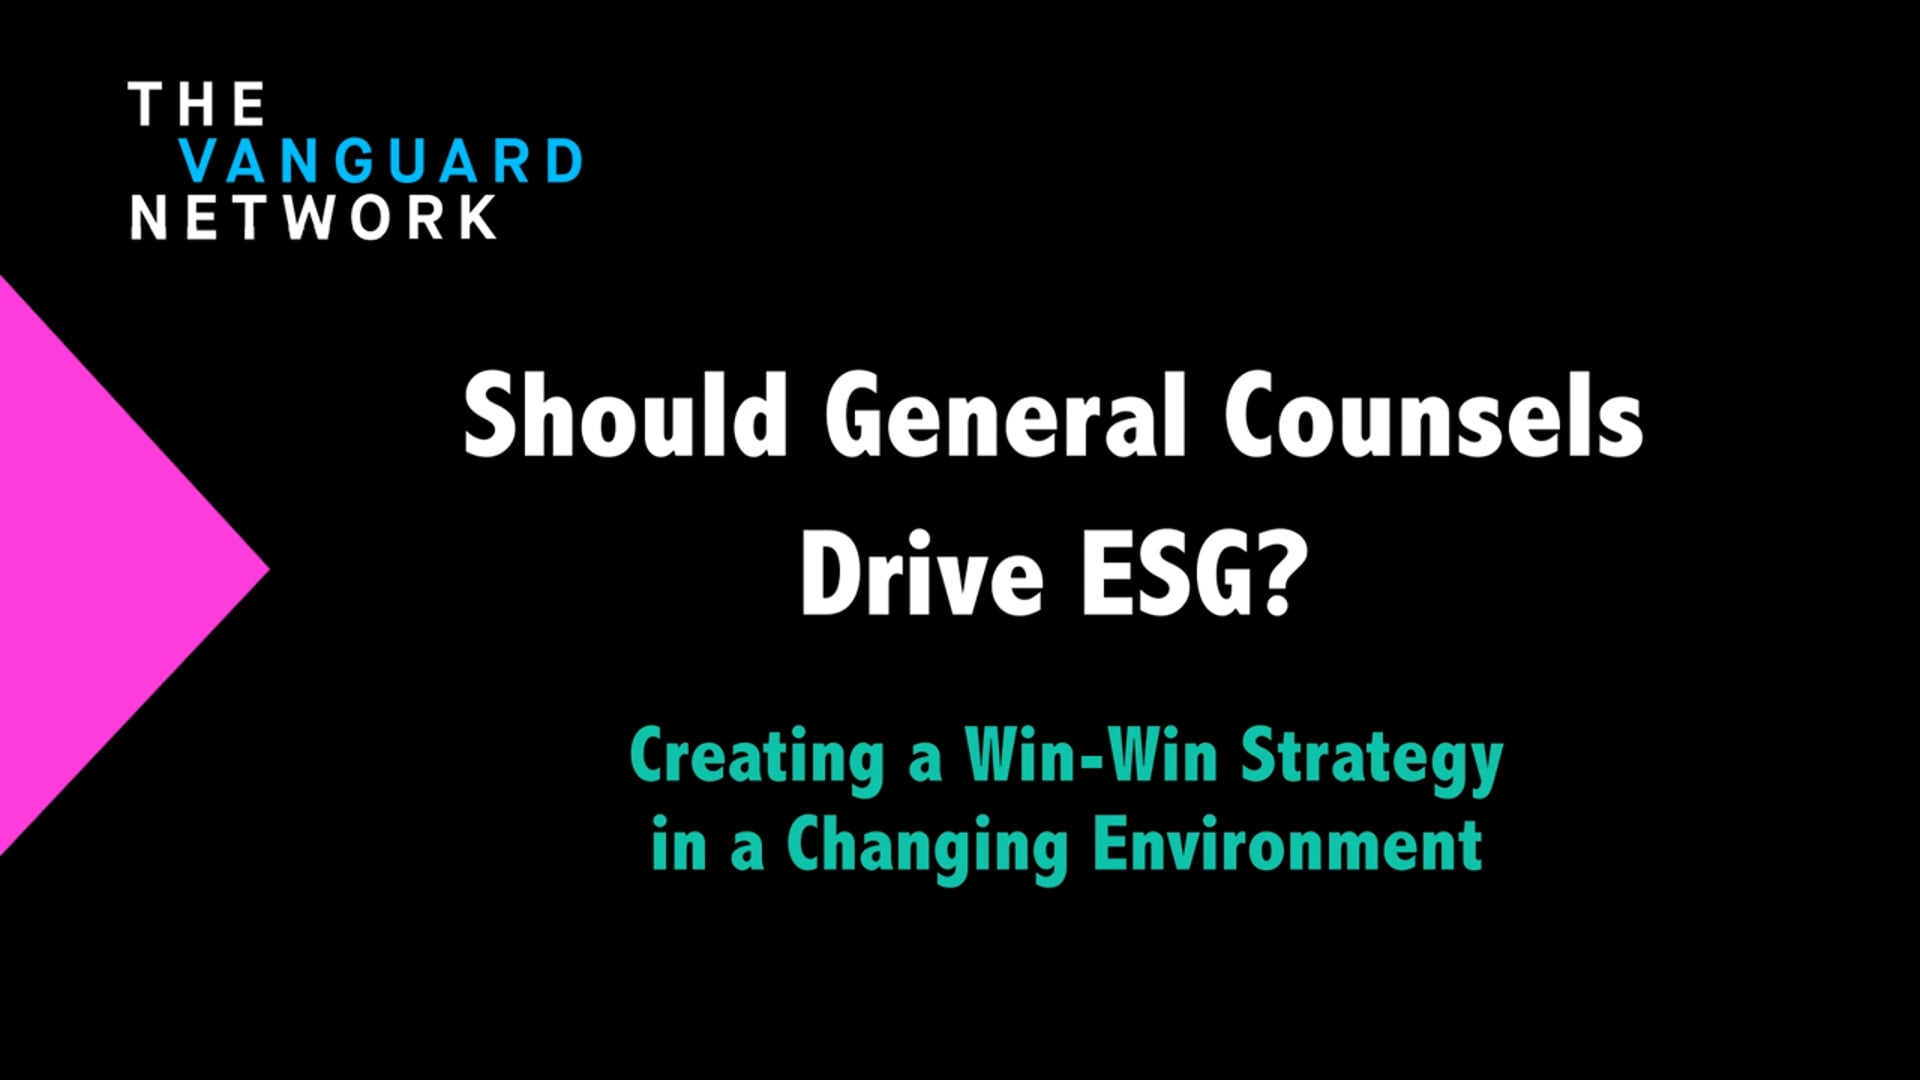 Getting Real About ESG, Part 1